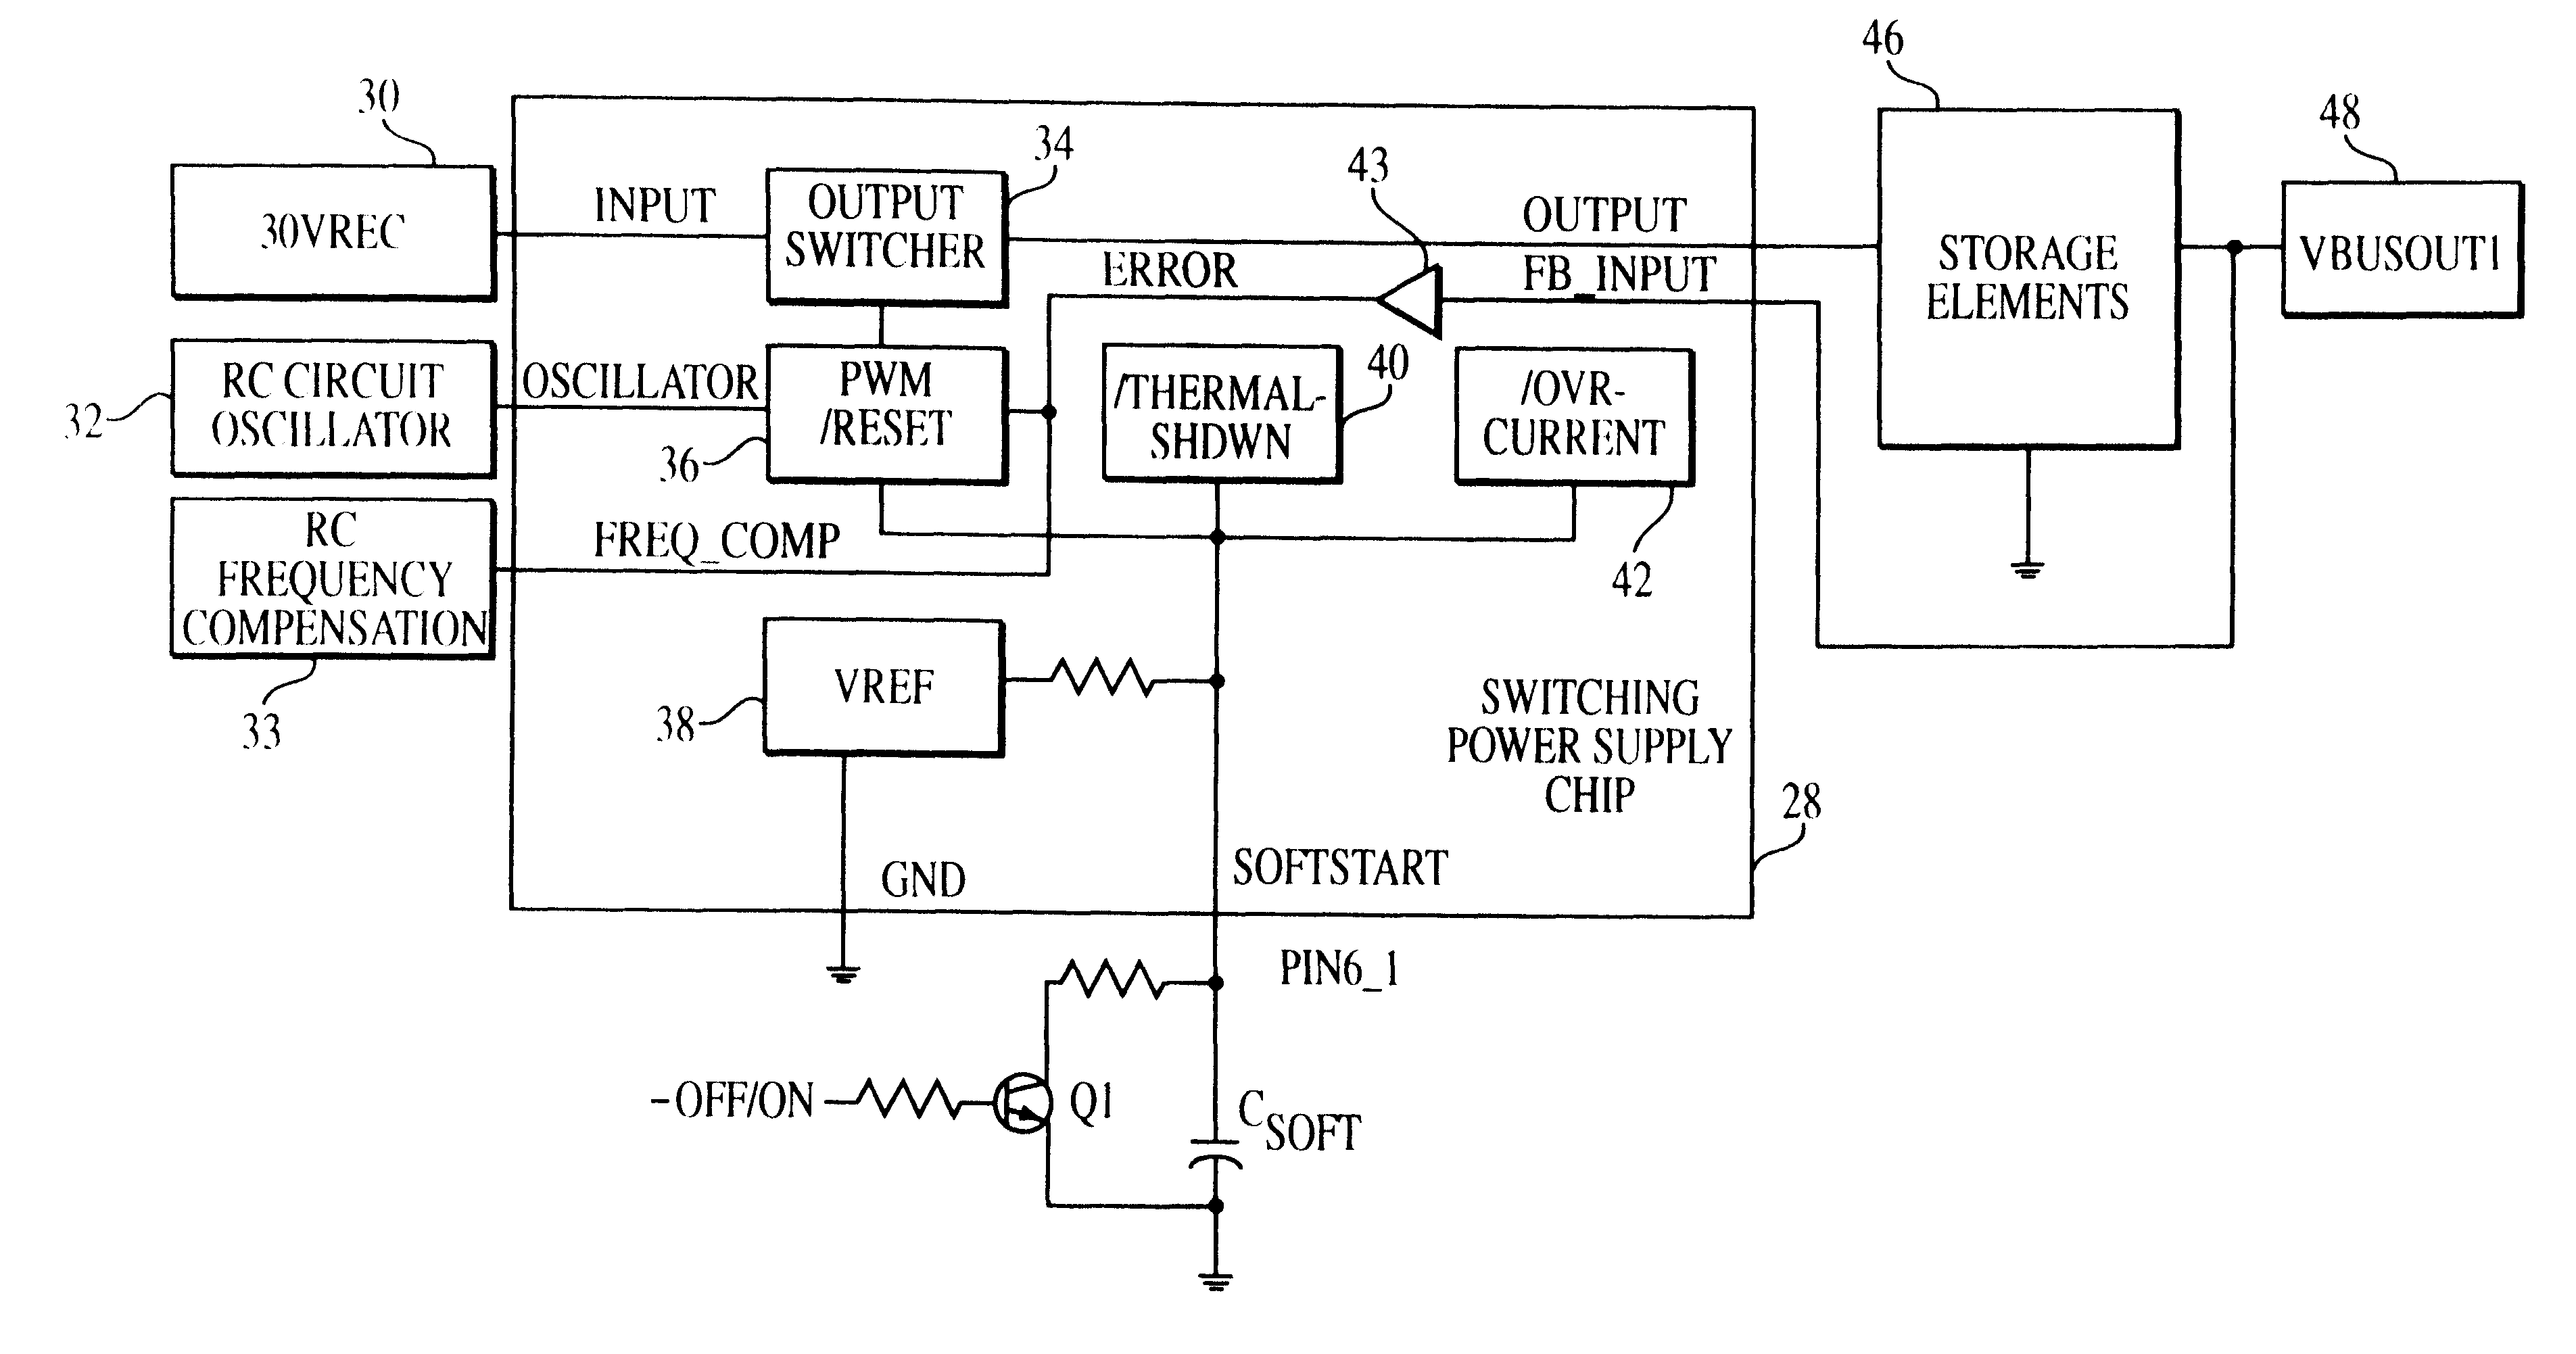 Fault detection on dual supply system for a universal serial bus system